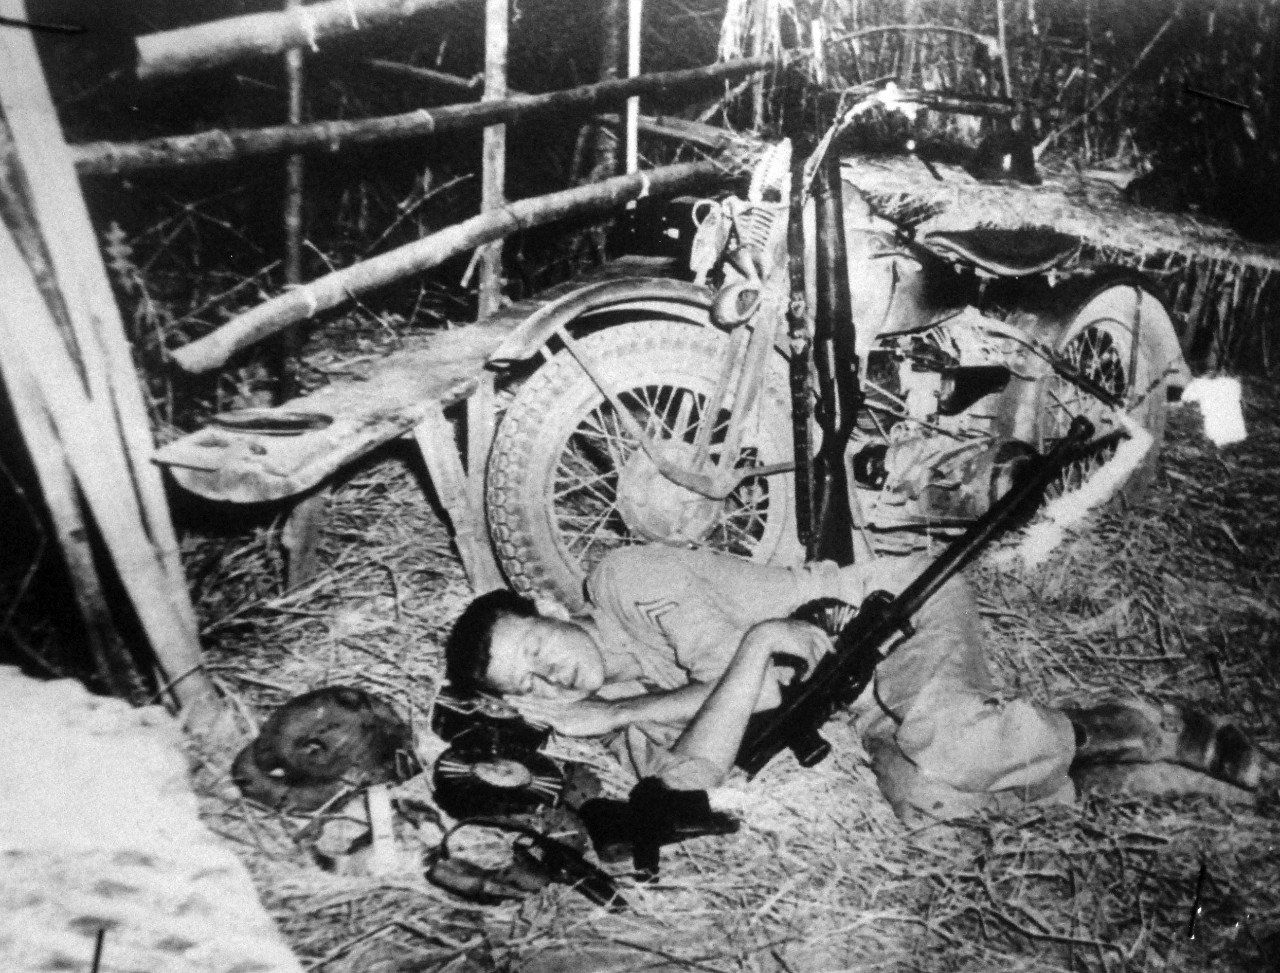 LC-Lot-9432-21: Battle of Bataan, January-April 1942.  They Sleep on Bataan With Weapons Handy.  Weary from long hours of vigilance in the Battle of Bataan, a U.S. Army dispatch rider takes a nap beside his machine at the end of a run, still cradling his gun.  The picture, taken during the last days of the Philippine-U.S. forces heroic four-months stand, tells the story of what overpowered the brave but badly out-numbered men – sheer exhaustion.  That, together with depleted stocks of arms and ammunition, together with dwindling supplies of food, finally terminated the battle.  Office of War Information Photograph, 9-15 April 1942.  Original photograph is small.  Courtesy of the Library of Congress.  (2015/12/18).